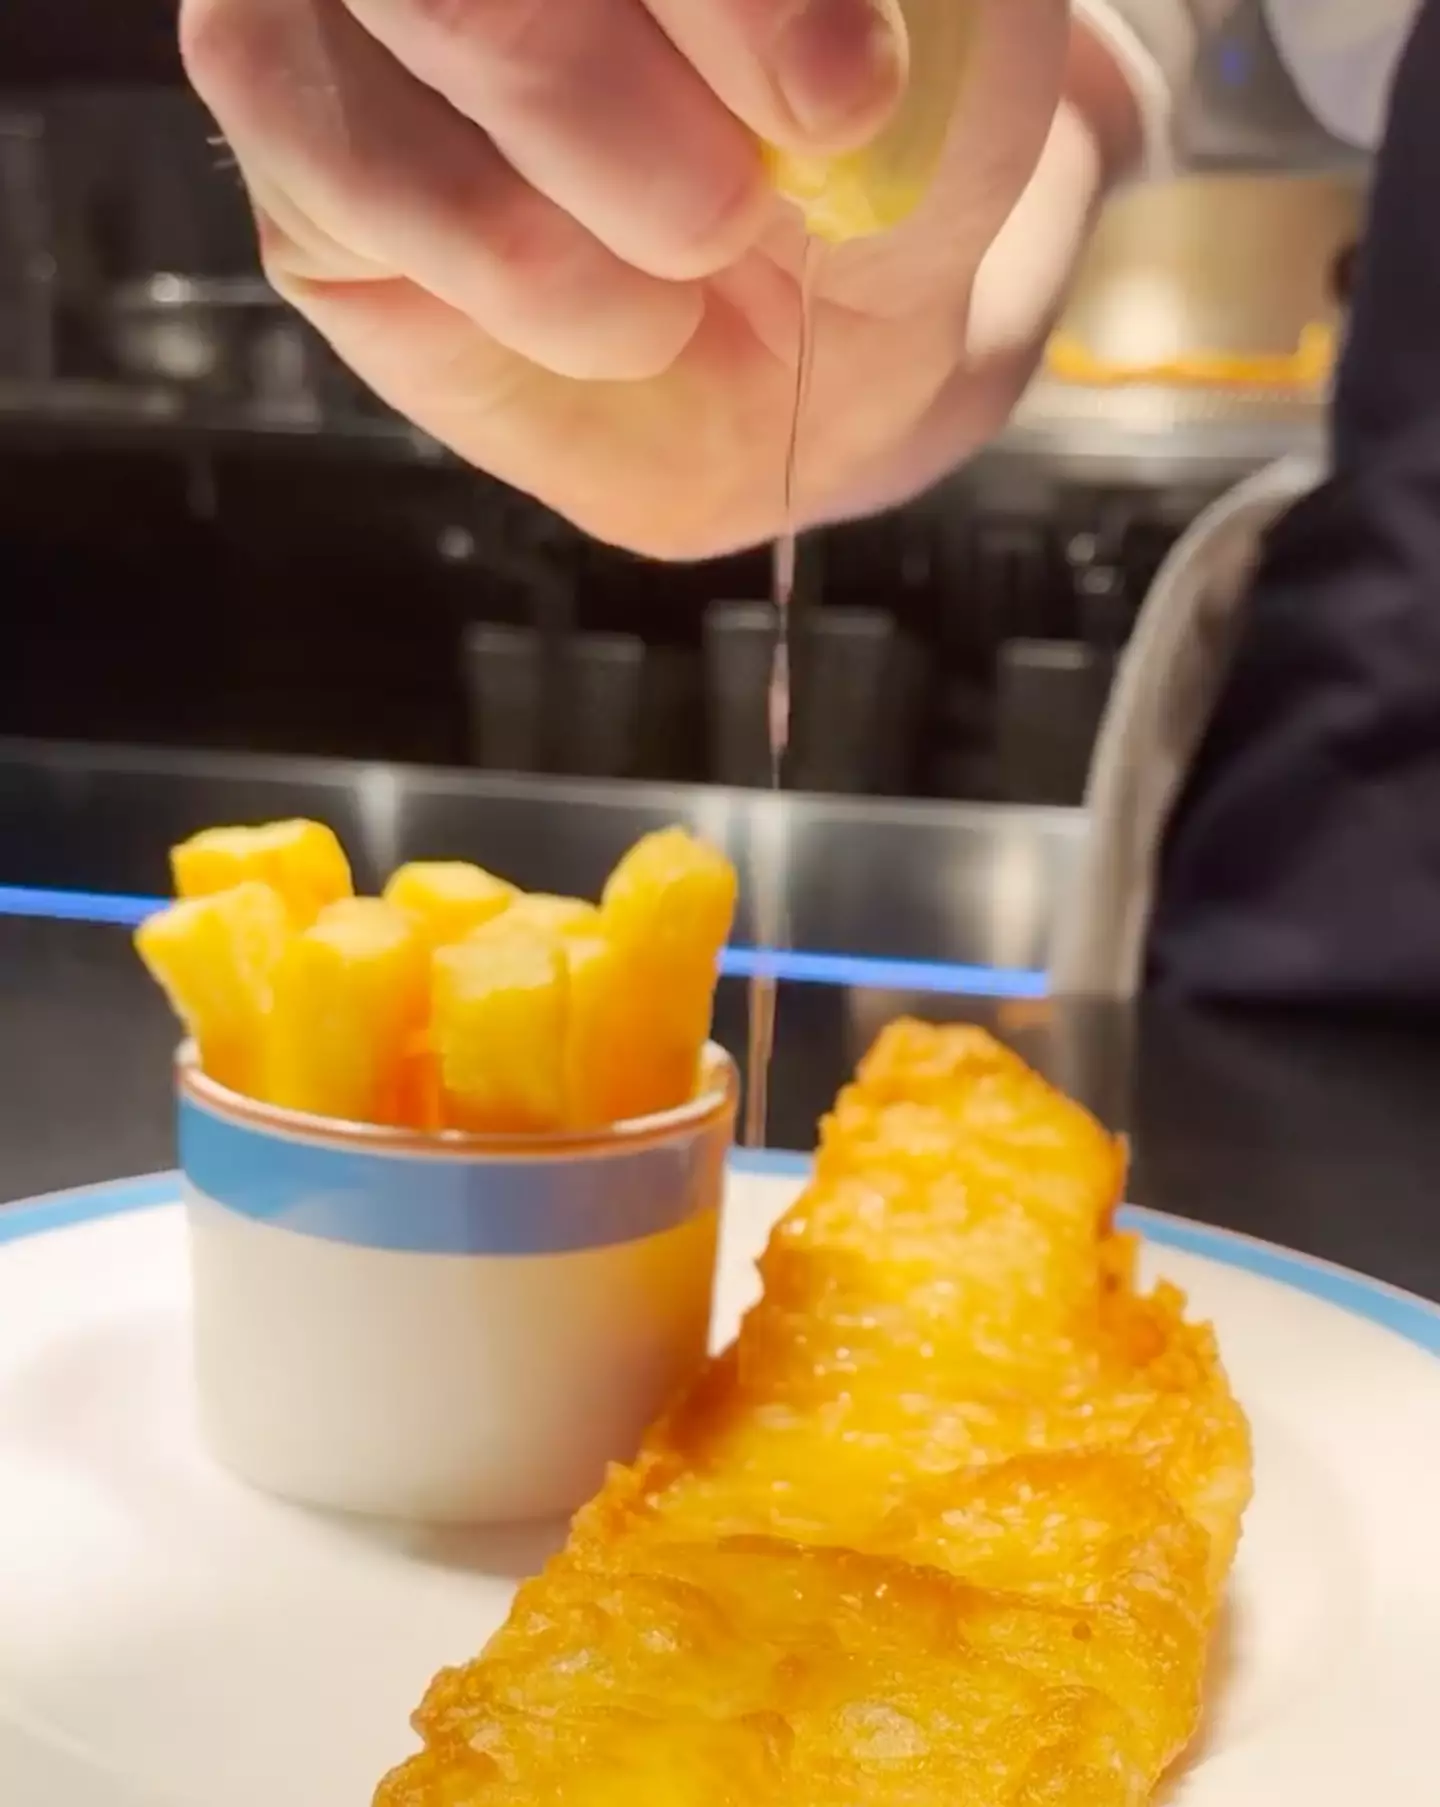 Social media users aren't happy about Tom Kerridge's fish and chips.